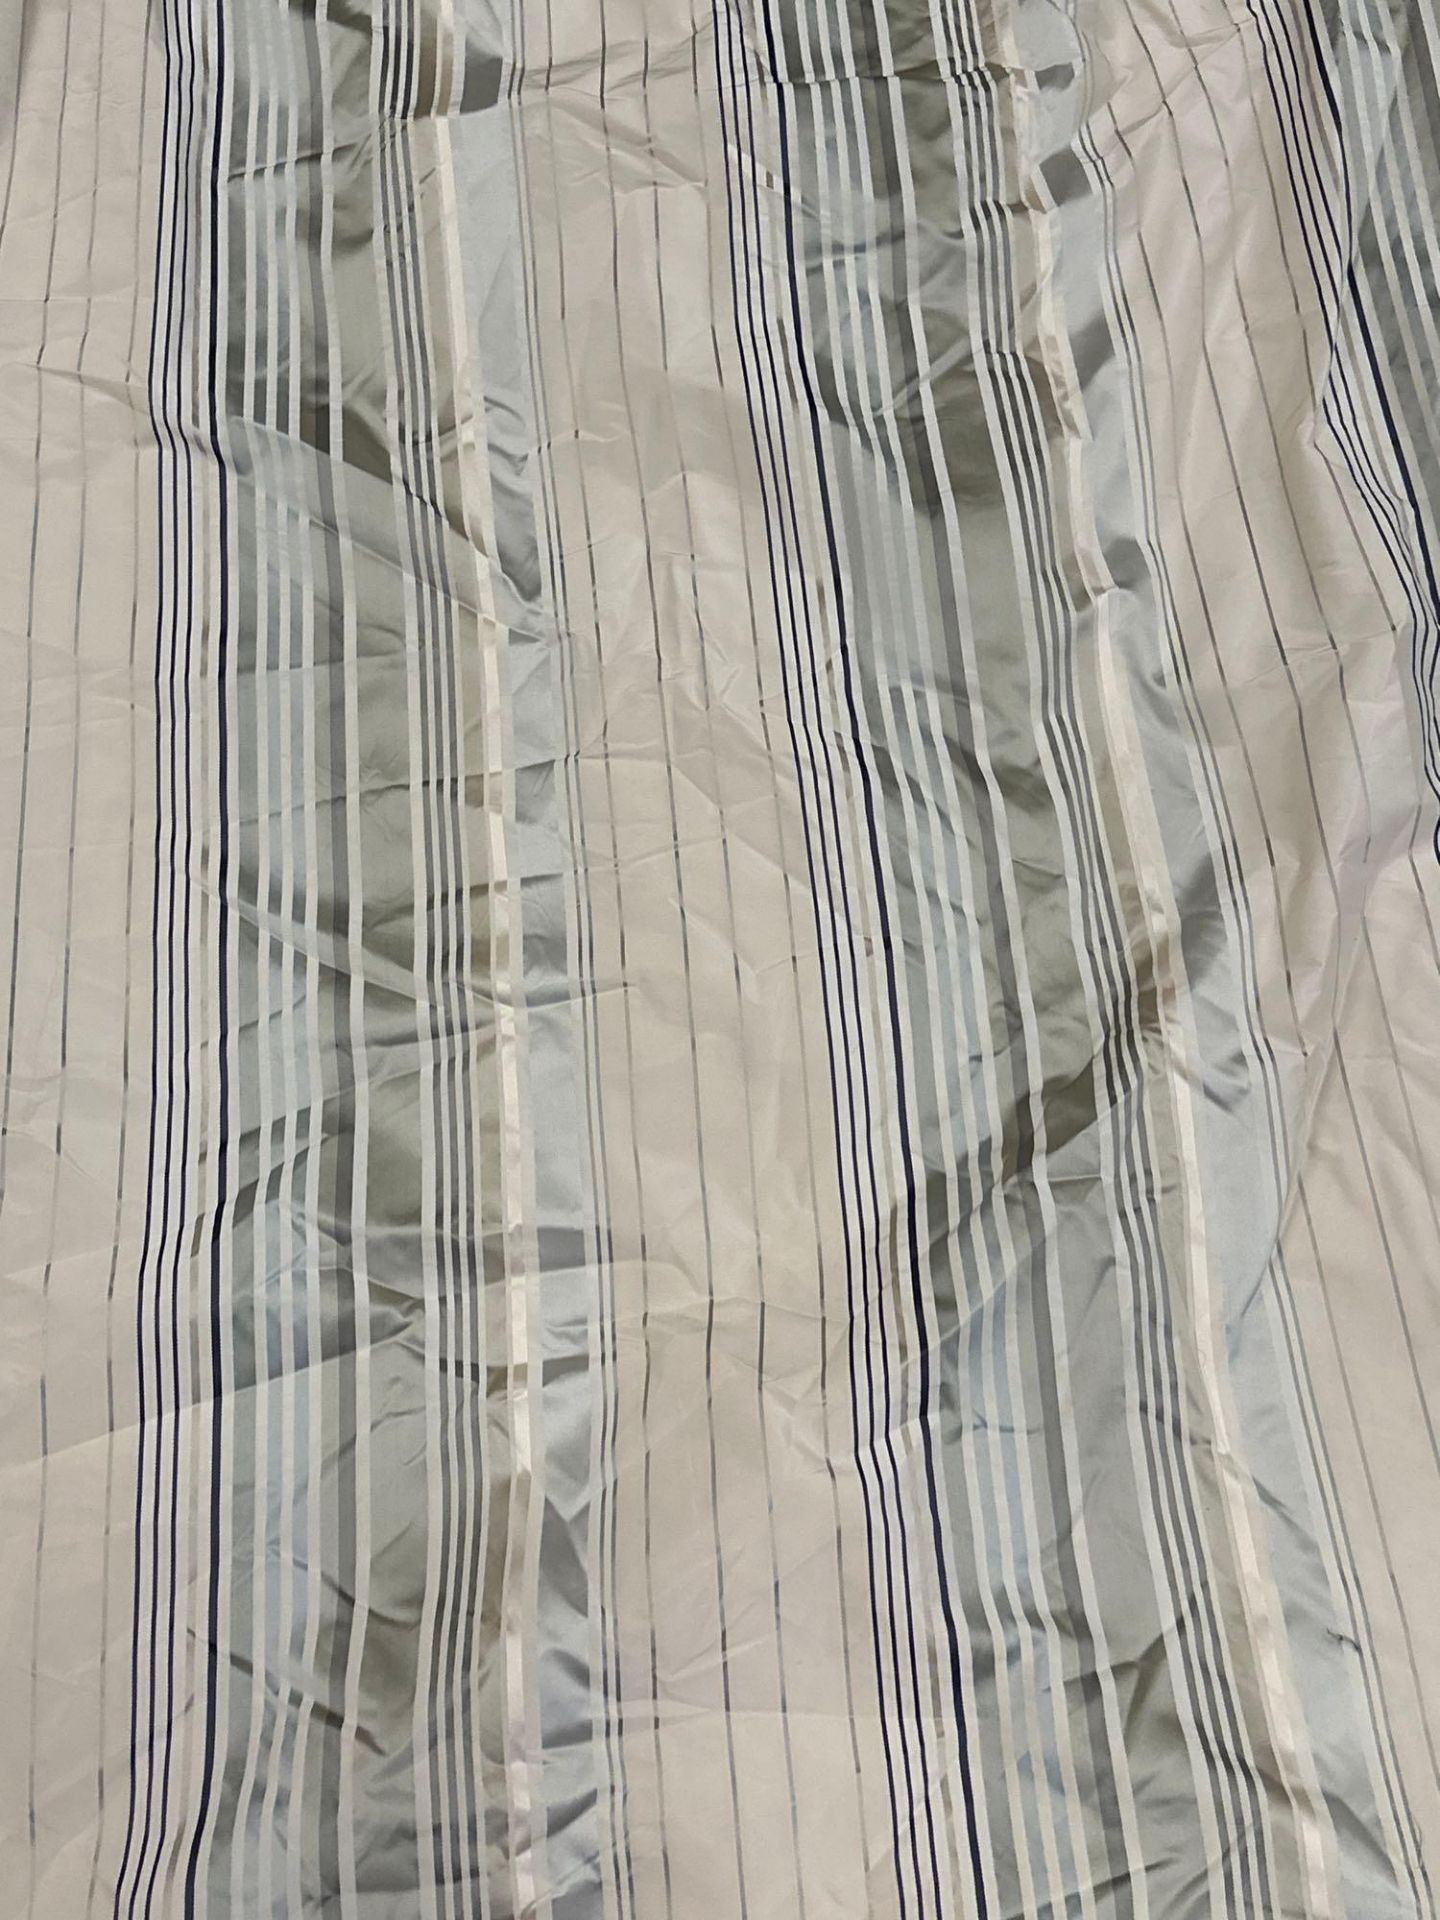 One Panel Of Striped Silk Lined Curtain 122 x 258cm - Image 2 of 3